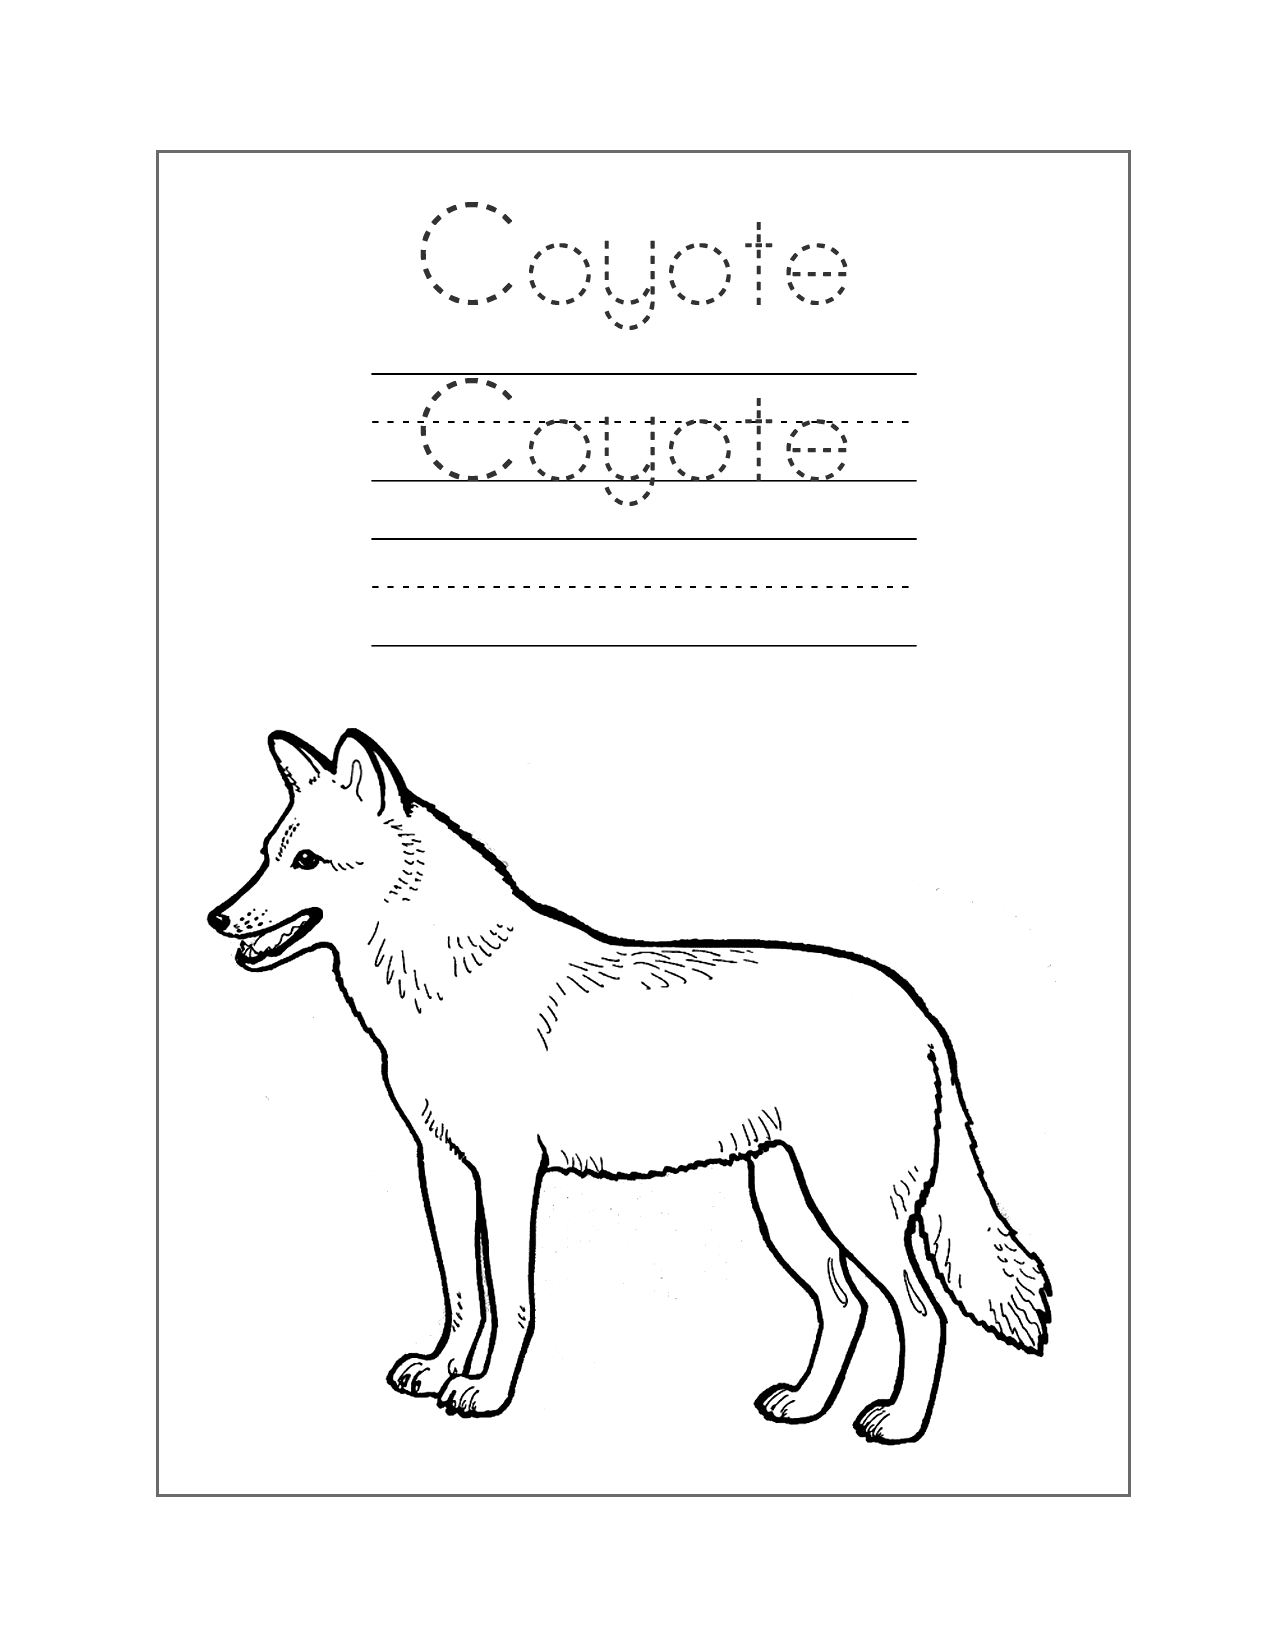 Coyote Spelling Coloring Sheet